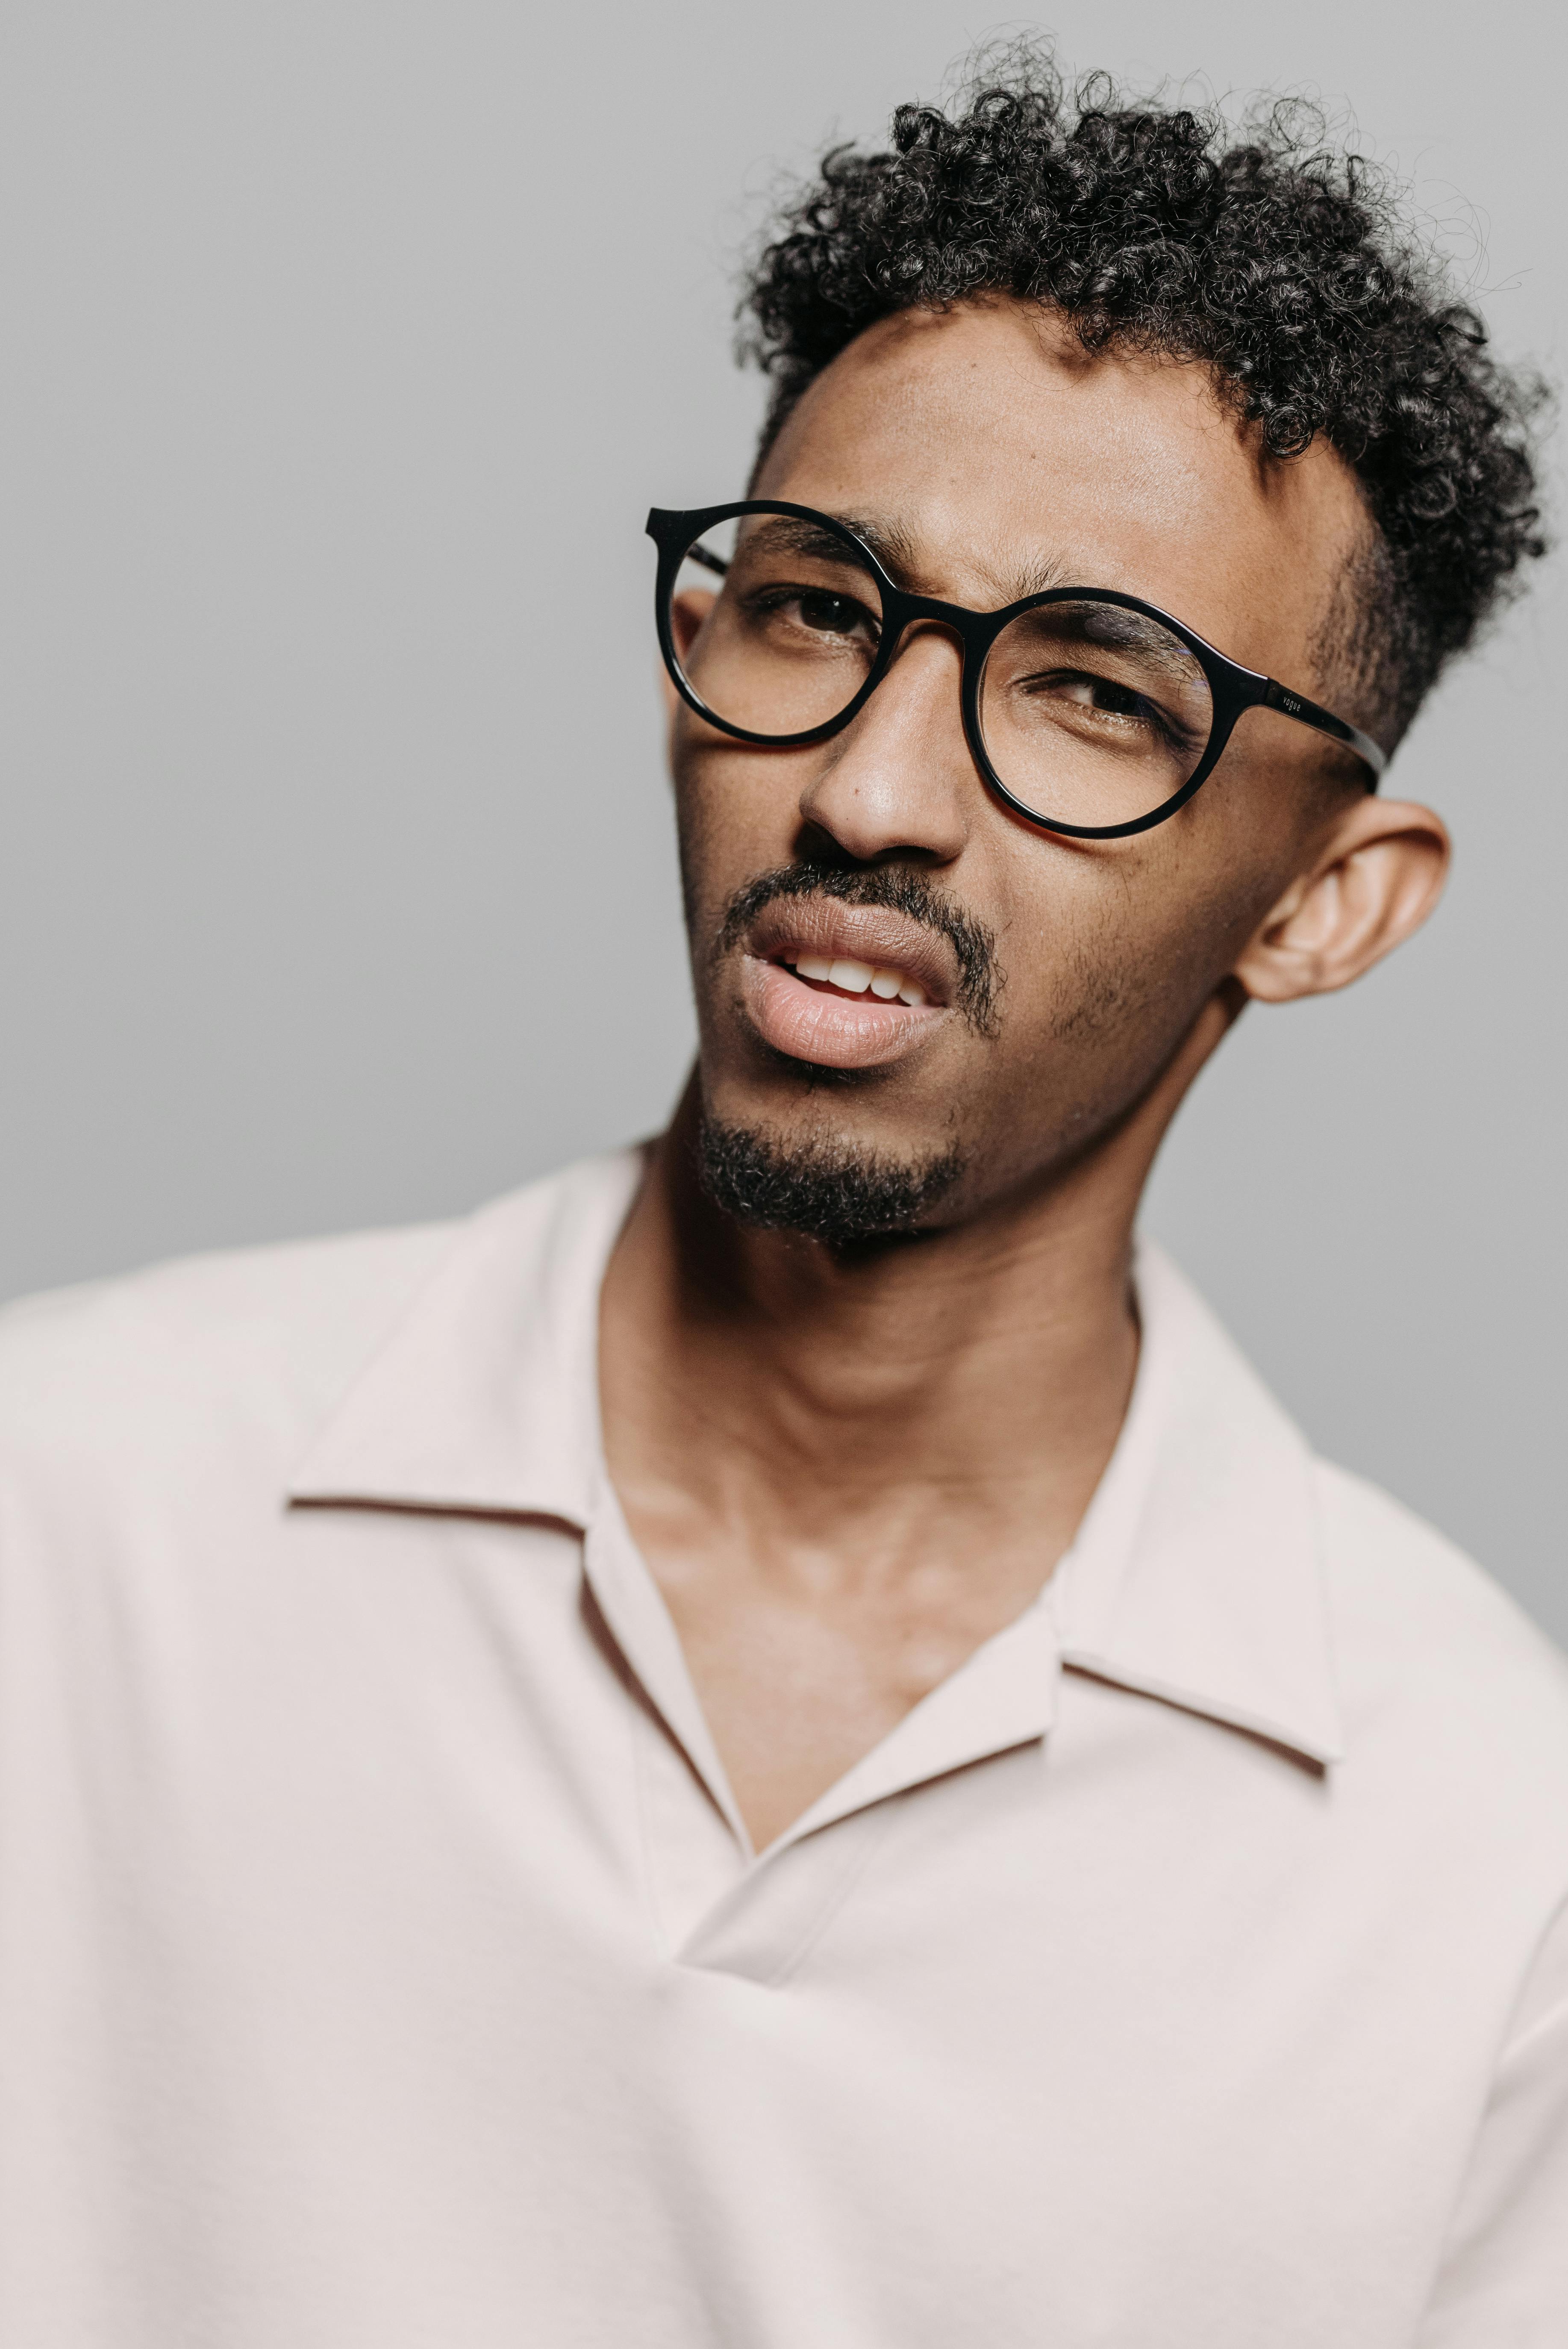 Man with Curly Hair Wearing Eyeglasses · Free Stock Photo